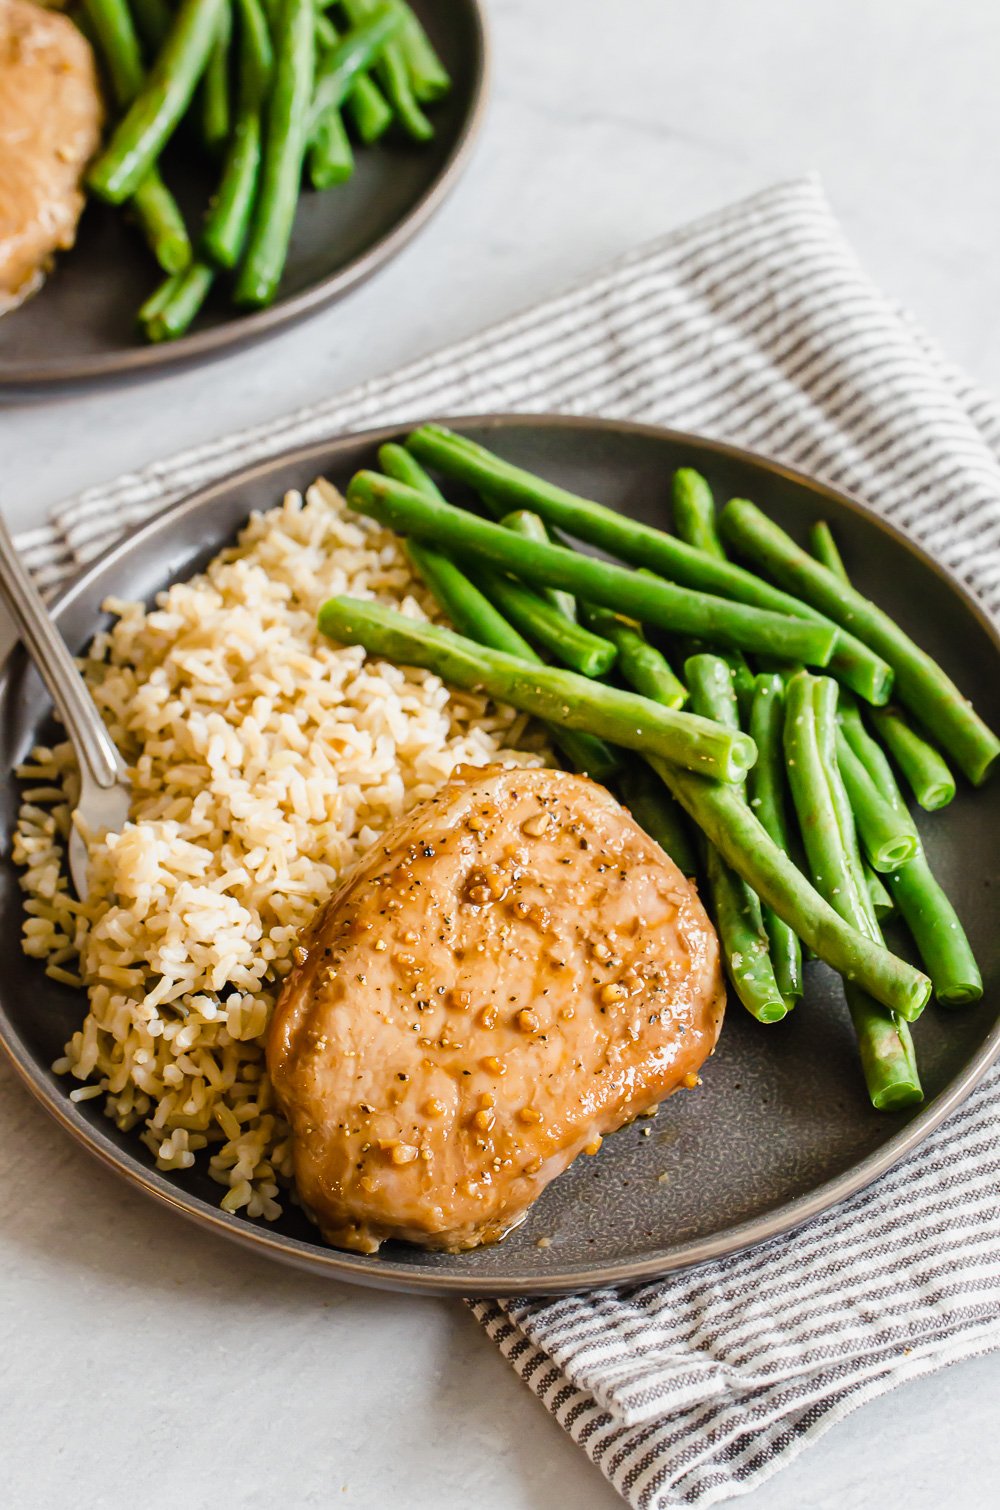 Sweet and savory baked pork chop on a plate with rice and green beans on the side.